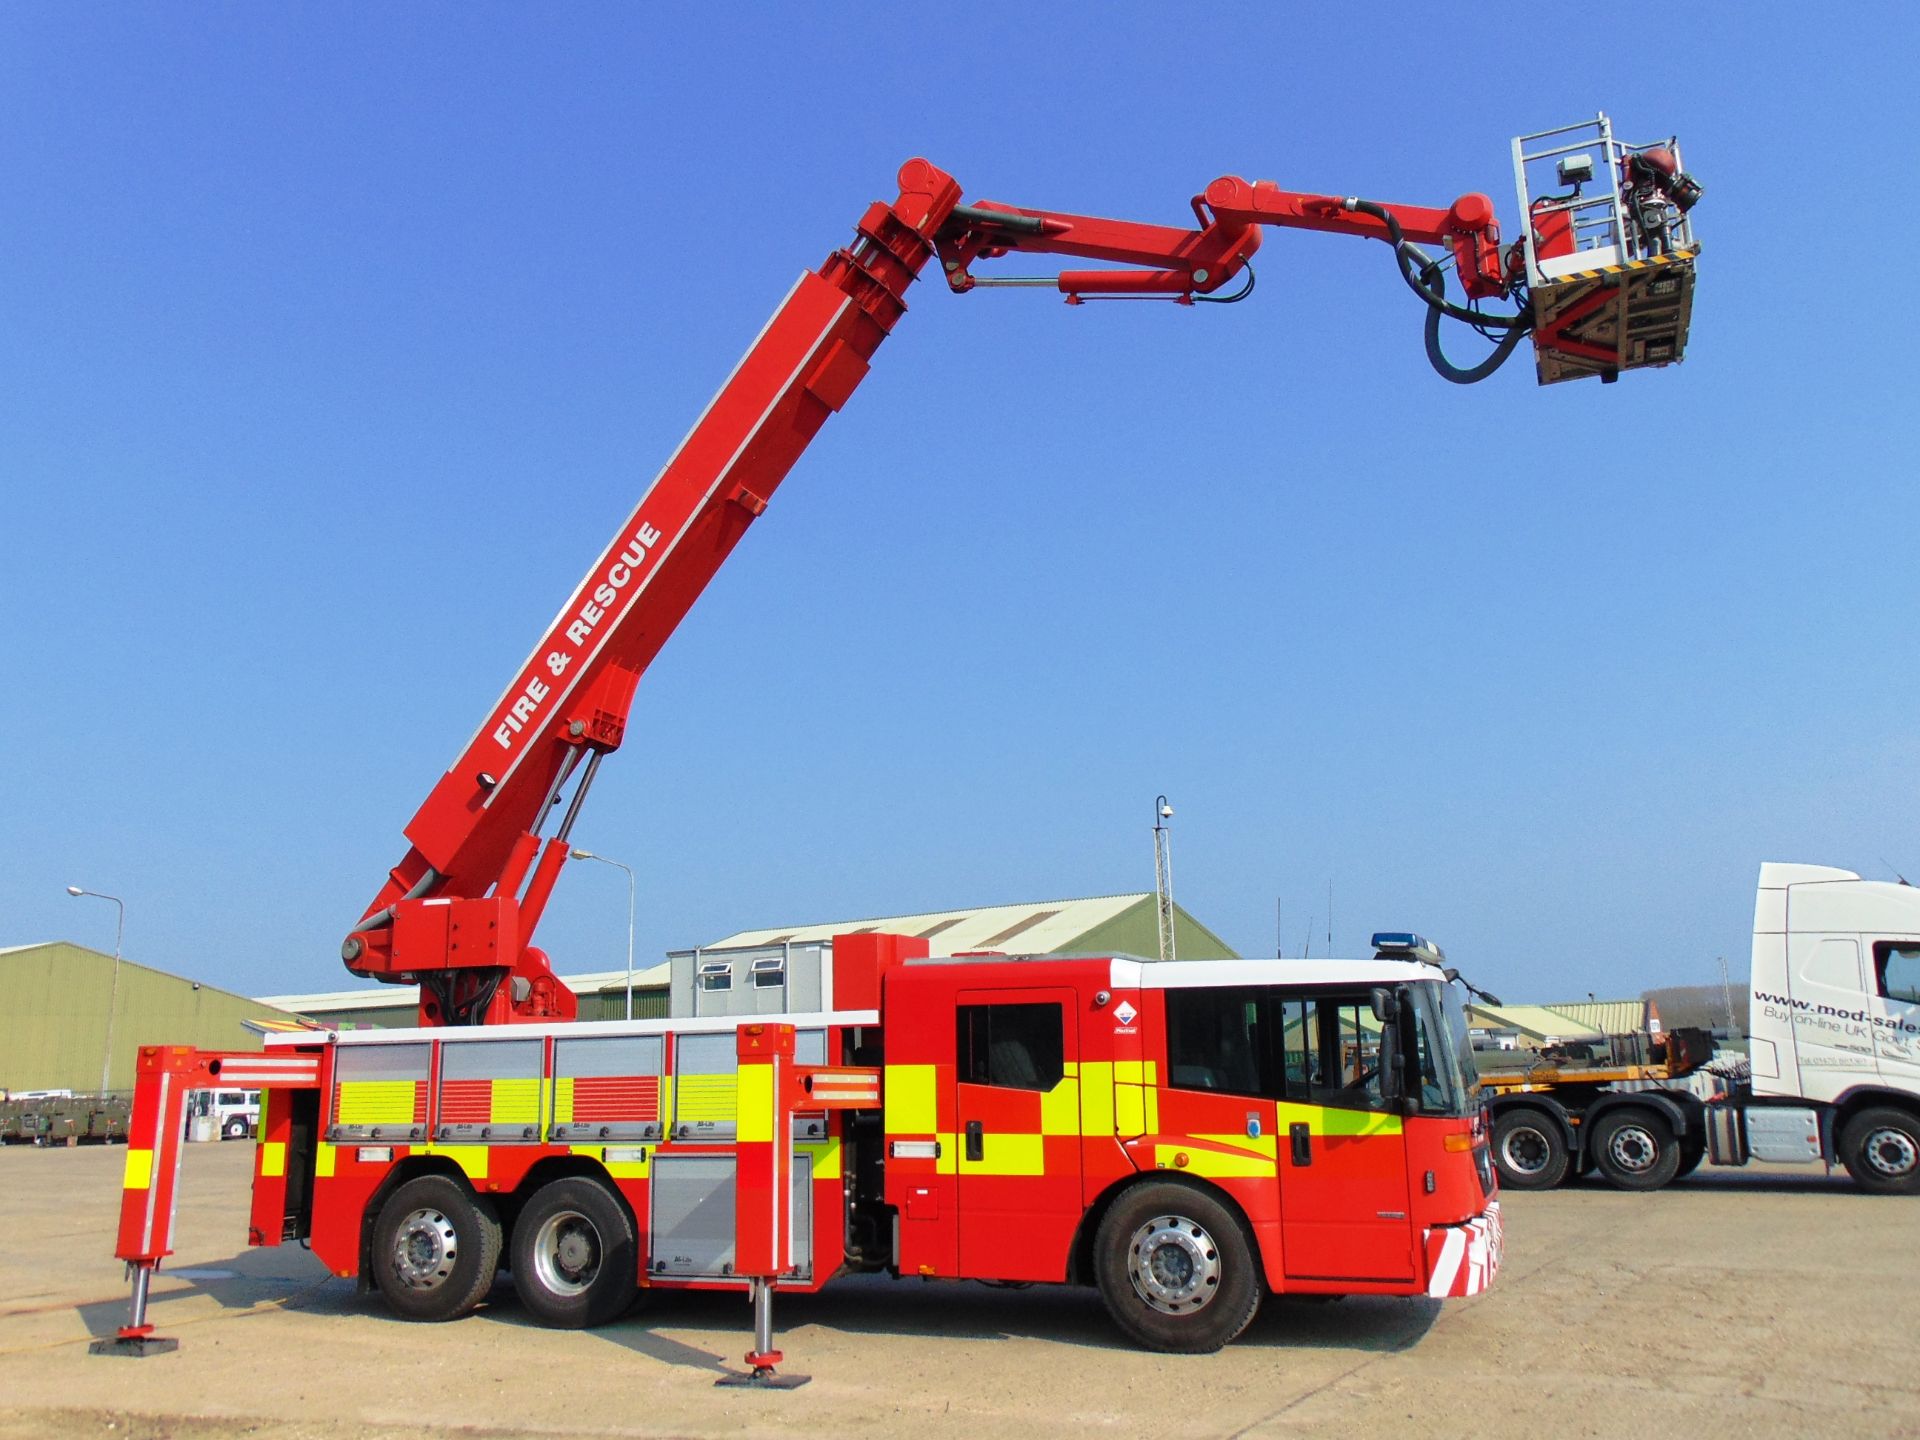 2008 Mercedes Econic CARP (Combined Aerial Rescue Pump) 6x2 Aerial Work Platform / Fire Appliance - Image 3 of 49